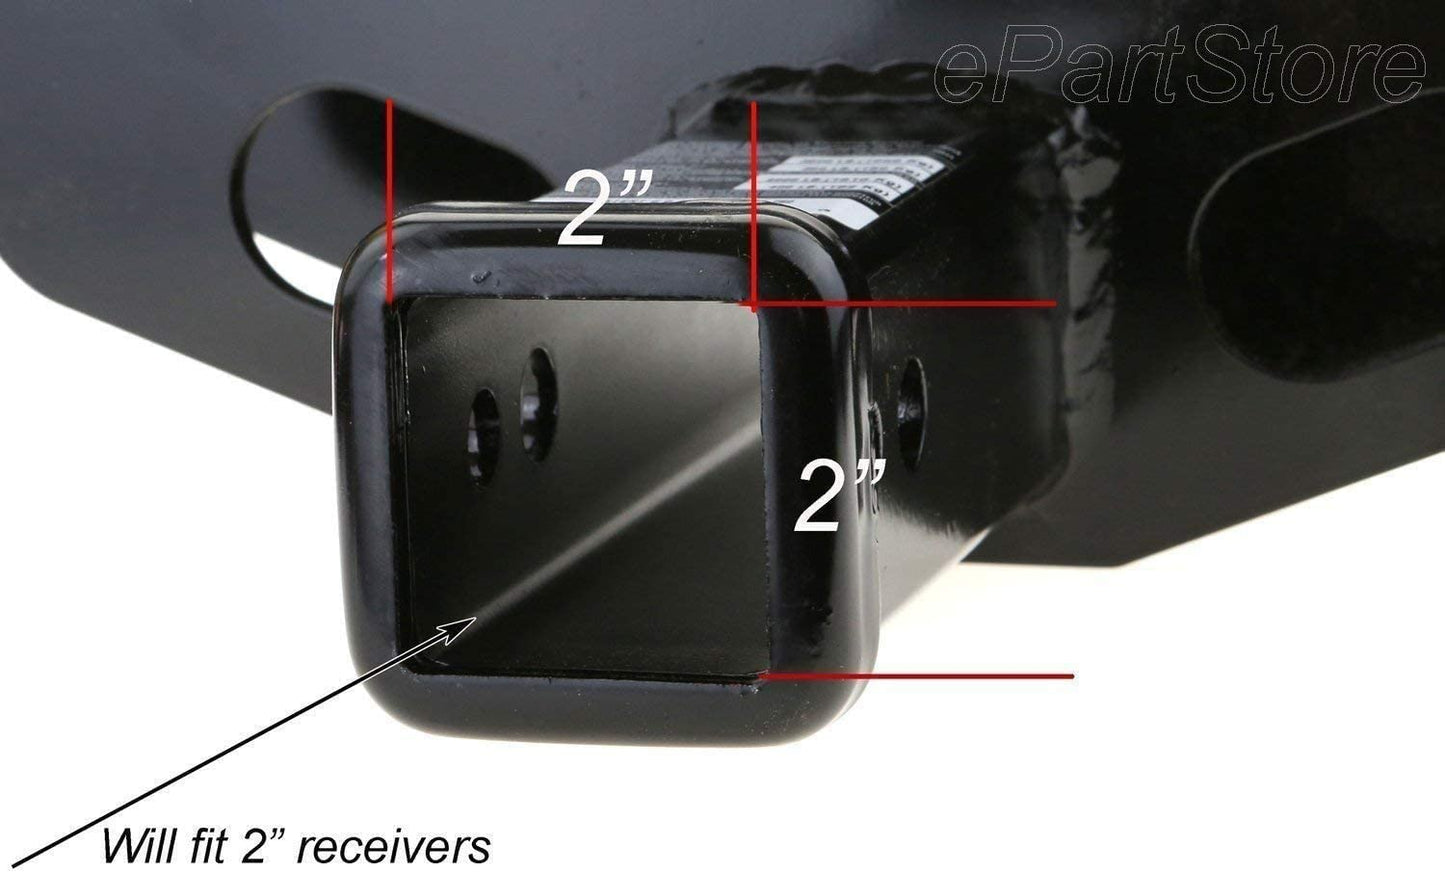 American Black Flag Metal Hitch Cover ( Fits 1.25", 2", 2.5" 3" Receiver)